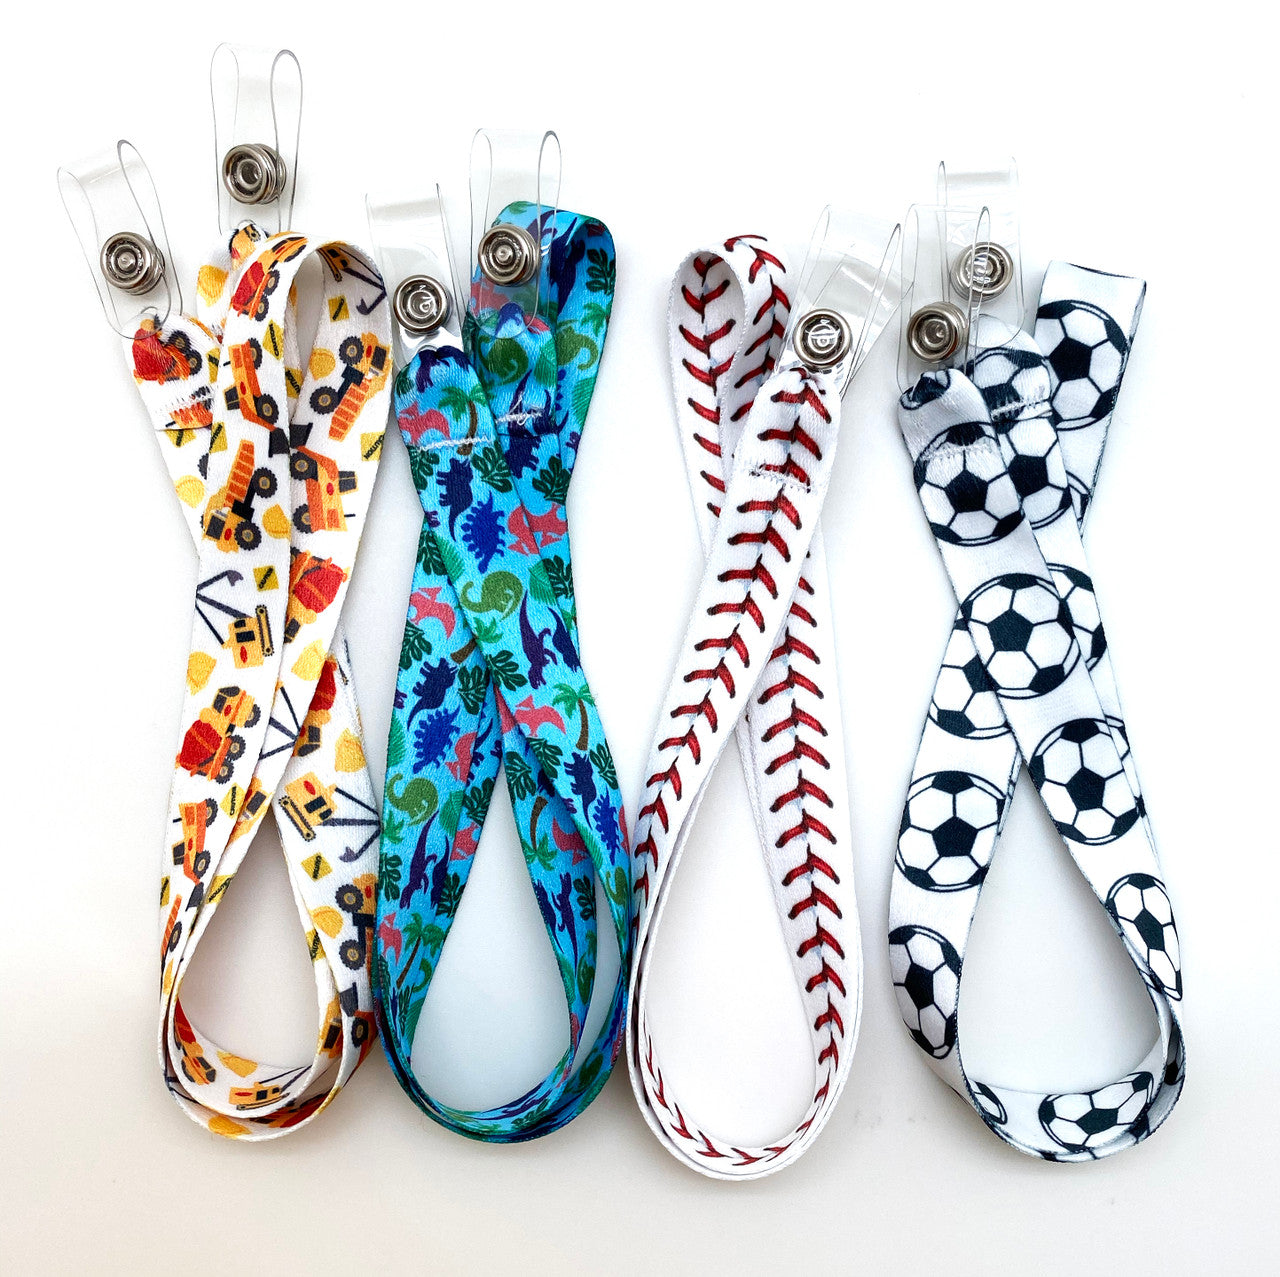 These lanyards are available in four fun designs for boys! Choose among construction vehicles, baseball stitch, dinosaurs, and soccer balls. Never lose a face mask at school, sports practice, on the bus or during lunch again!